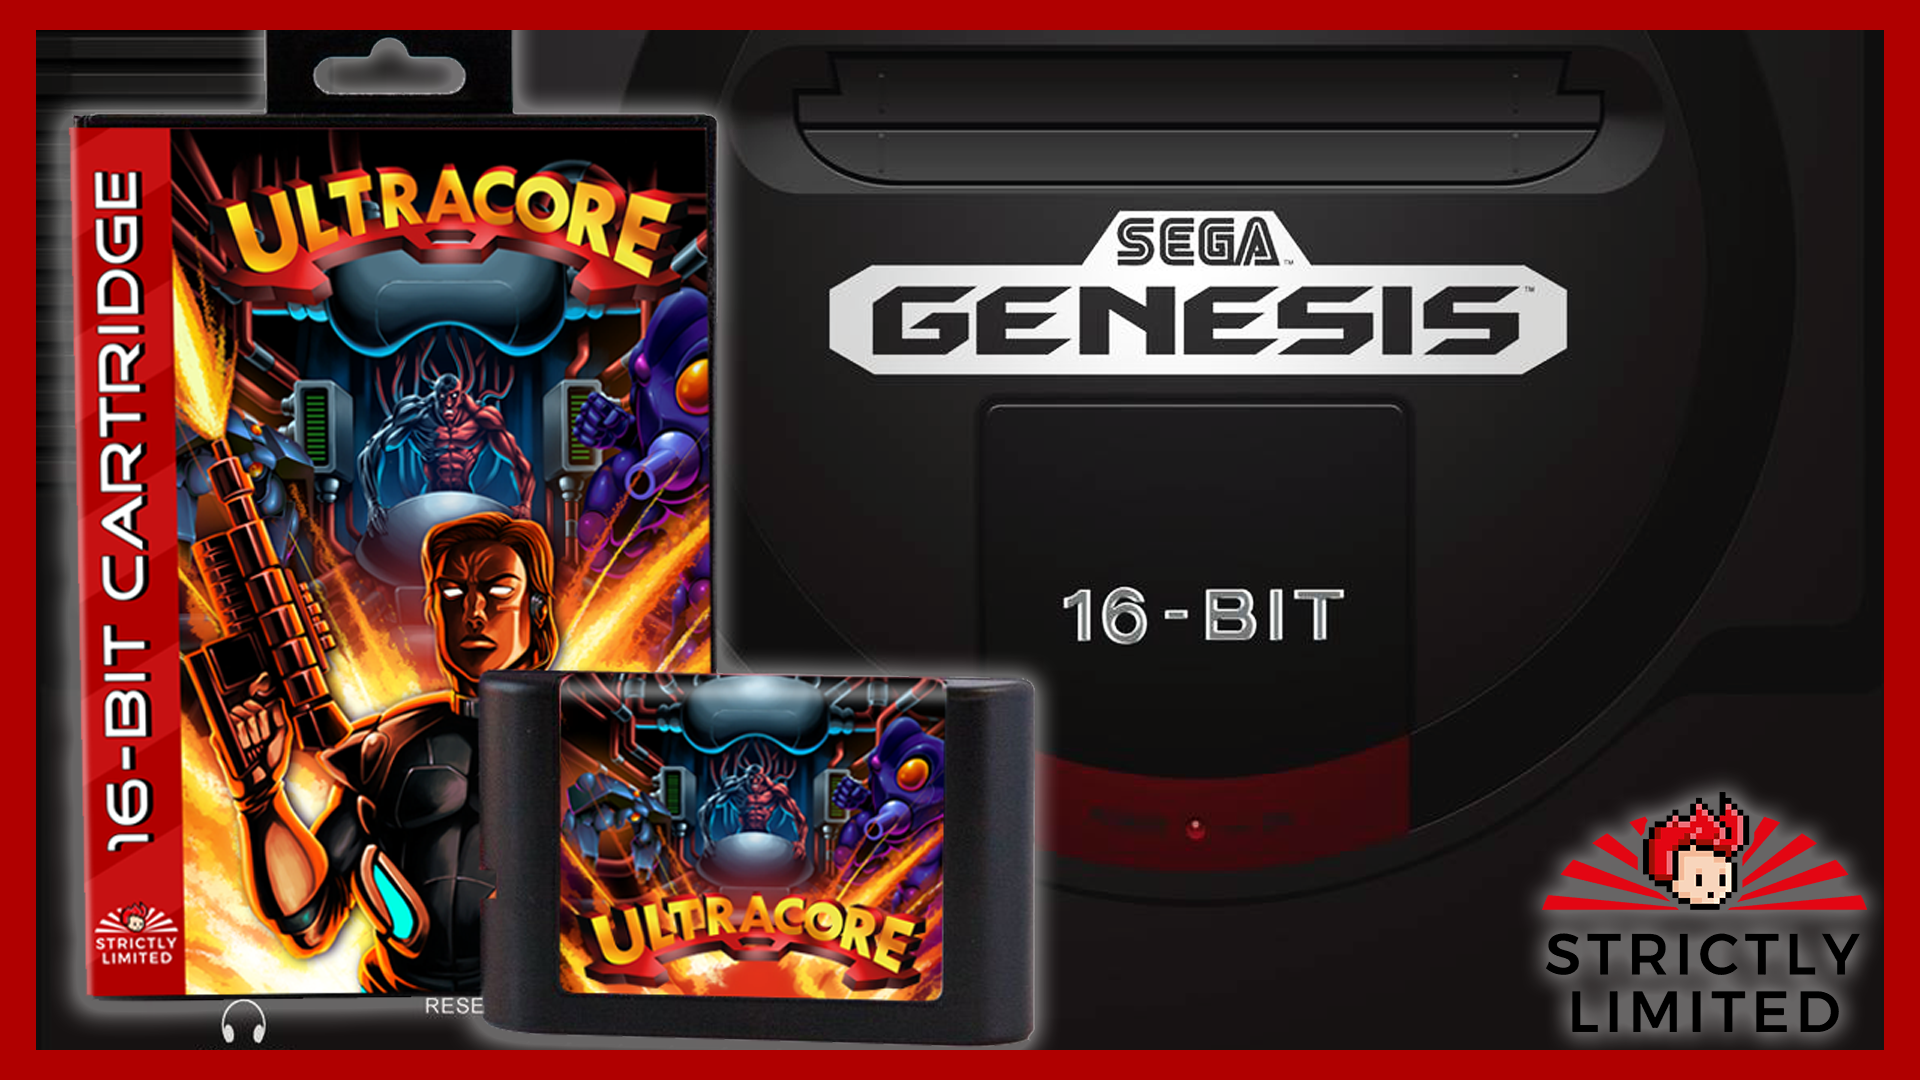 Ultracore Physical Copy for the Genesis / Mega Drive Announced